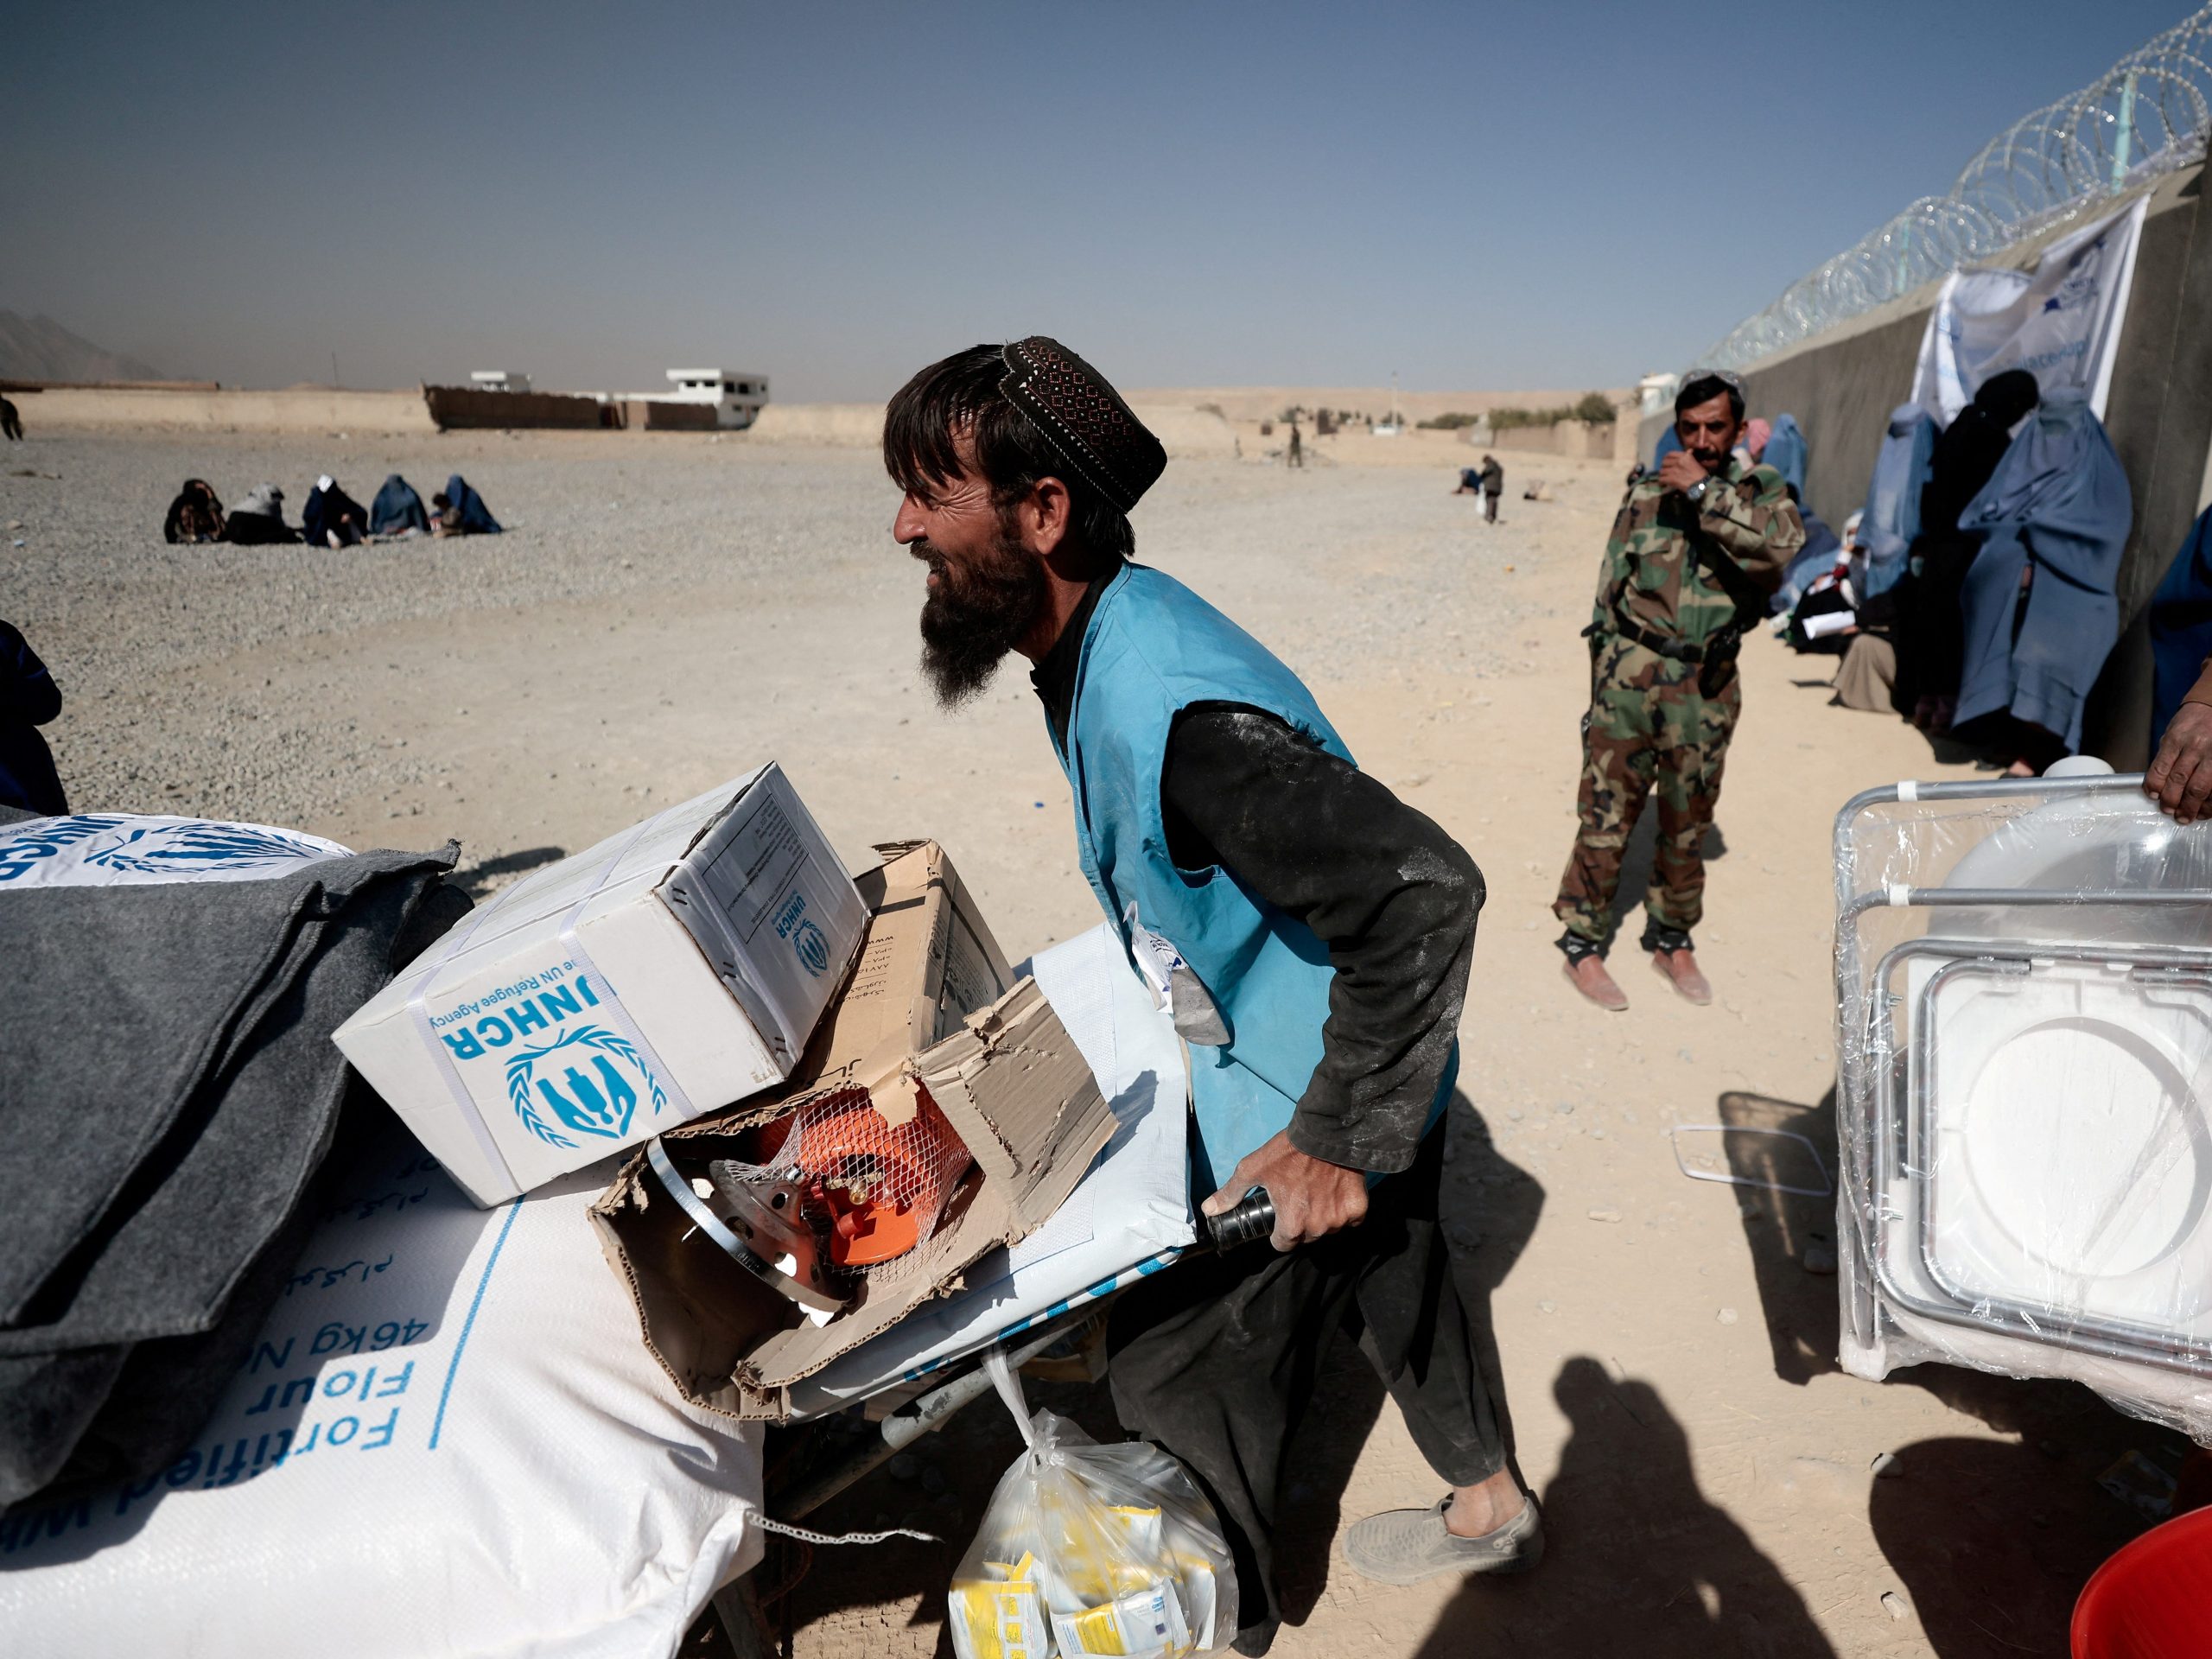 United Nations unloading supplies for Afghans.